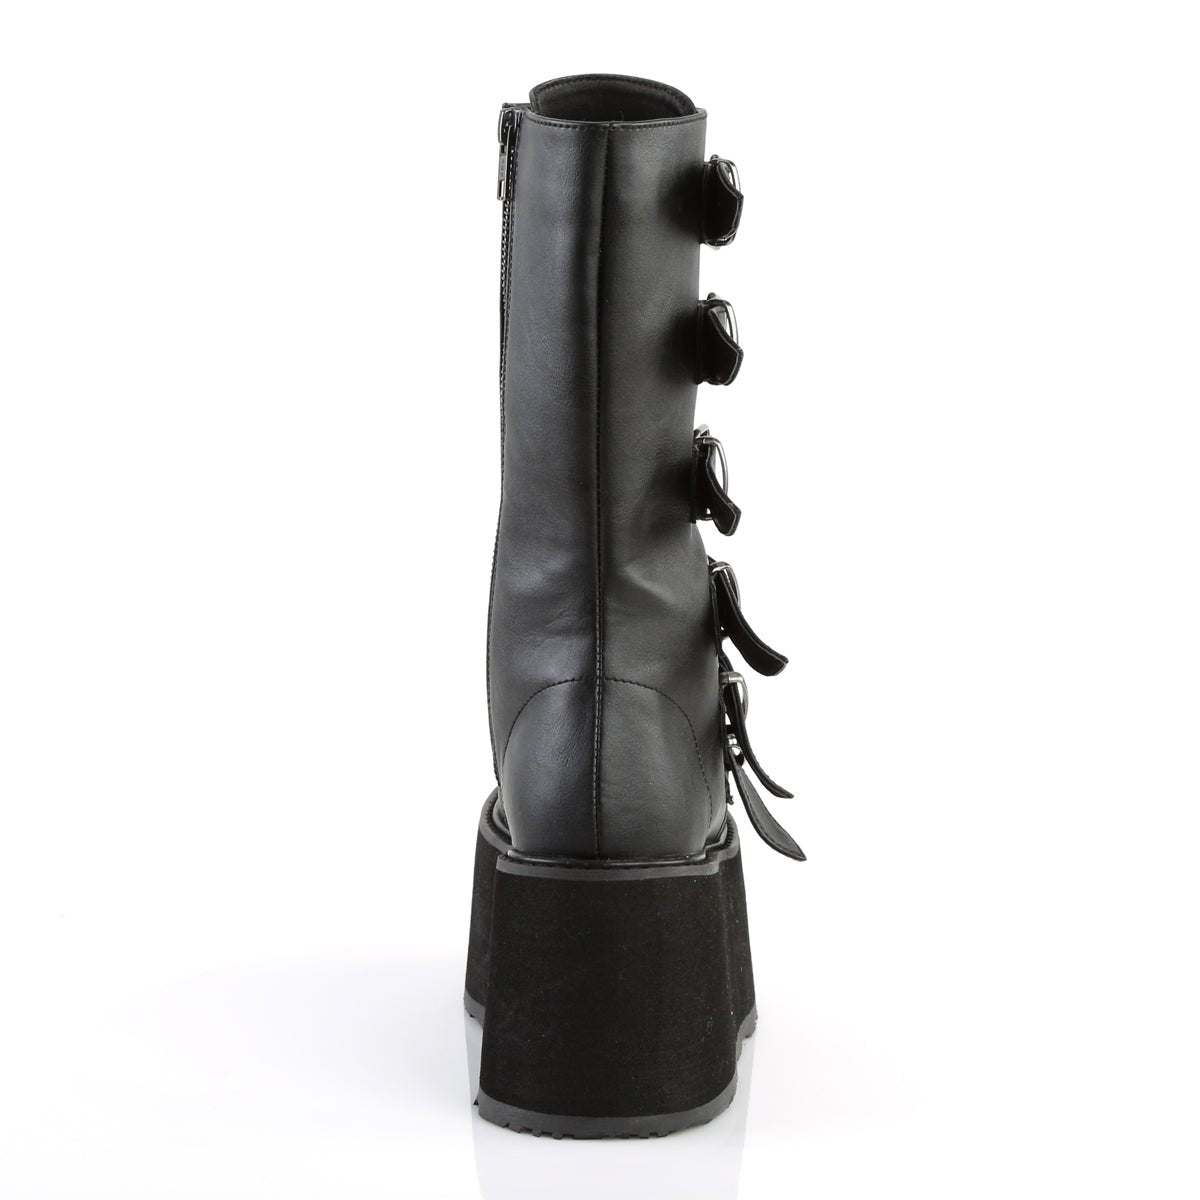 Too Fast | Demonia Damned 225 | Black Vegan Leather Women's Mid Calf Boots